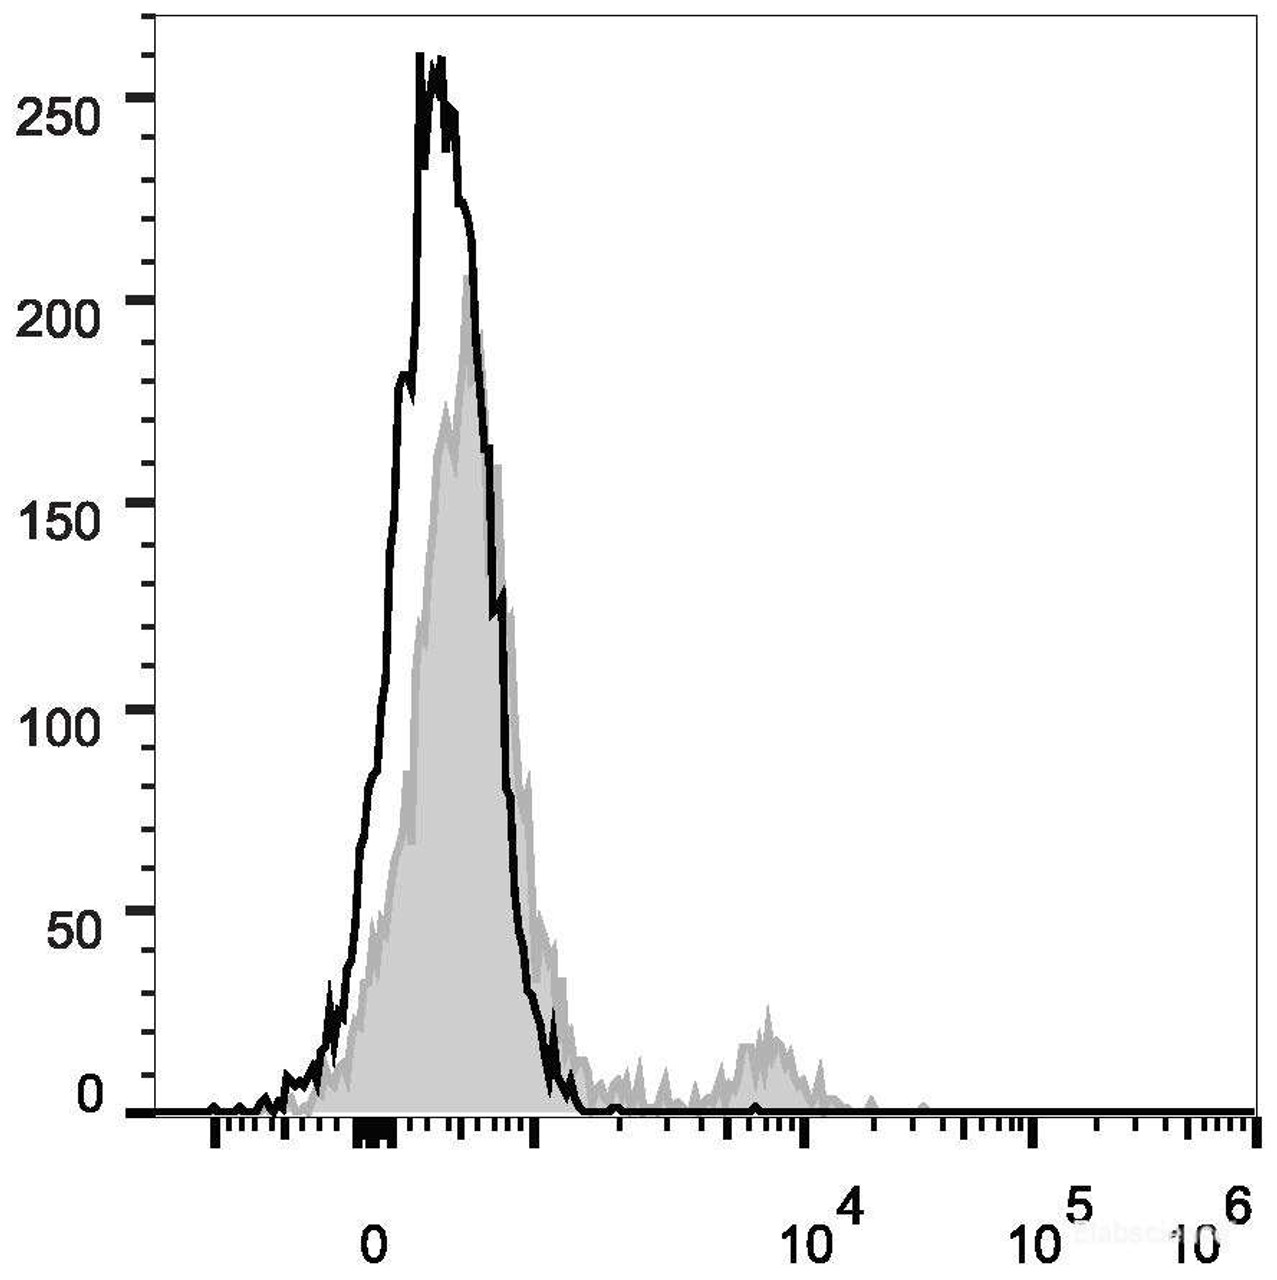 C57BL/6 murine splenocytes are stained with FITC Anti-Mouse TER-119 Antibody[Used at .2 μg/1<sup>6</sup> cells dilution](filled gray histogram). Unstained splenocytes (empty black histogram) are used as control.